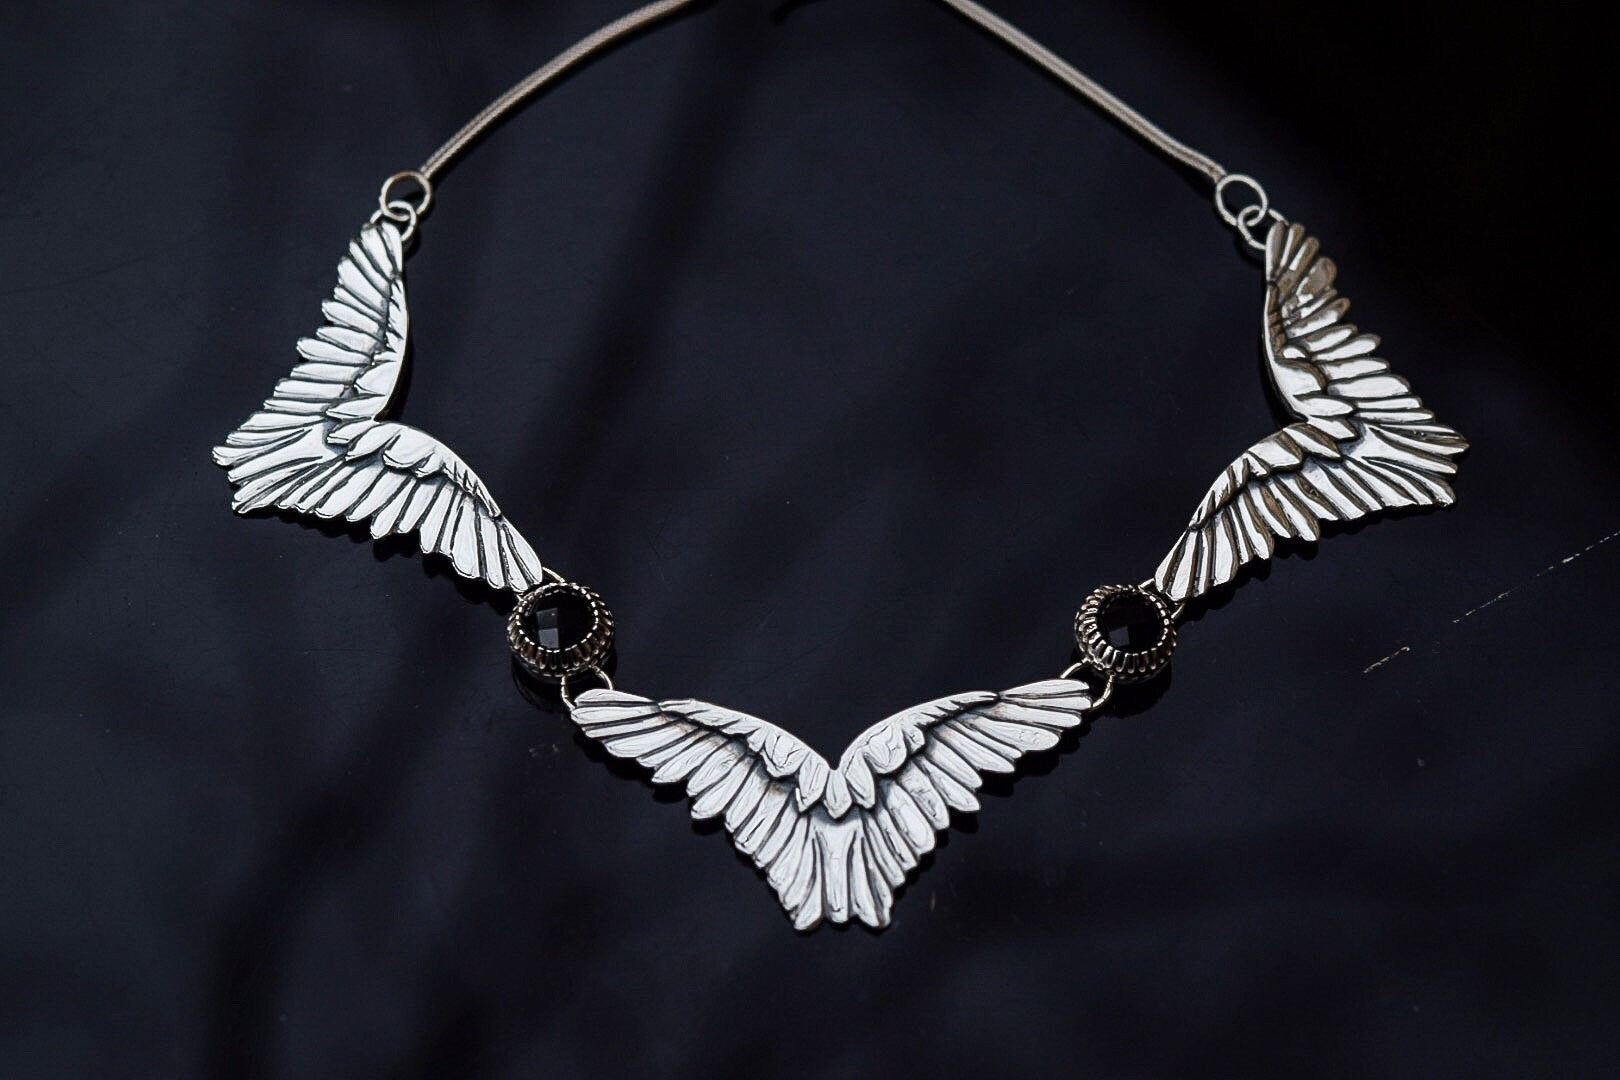 Large Wing Collar Necklace/ Black Onyx/ Statement Necklace